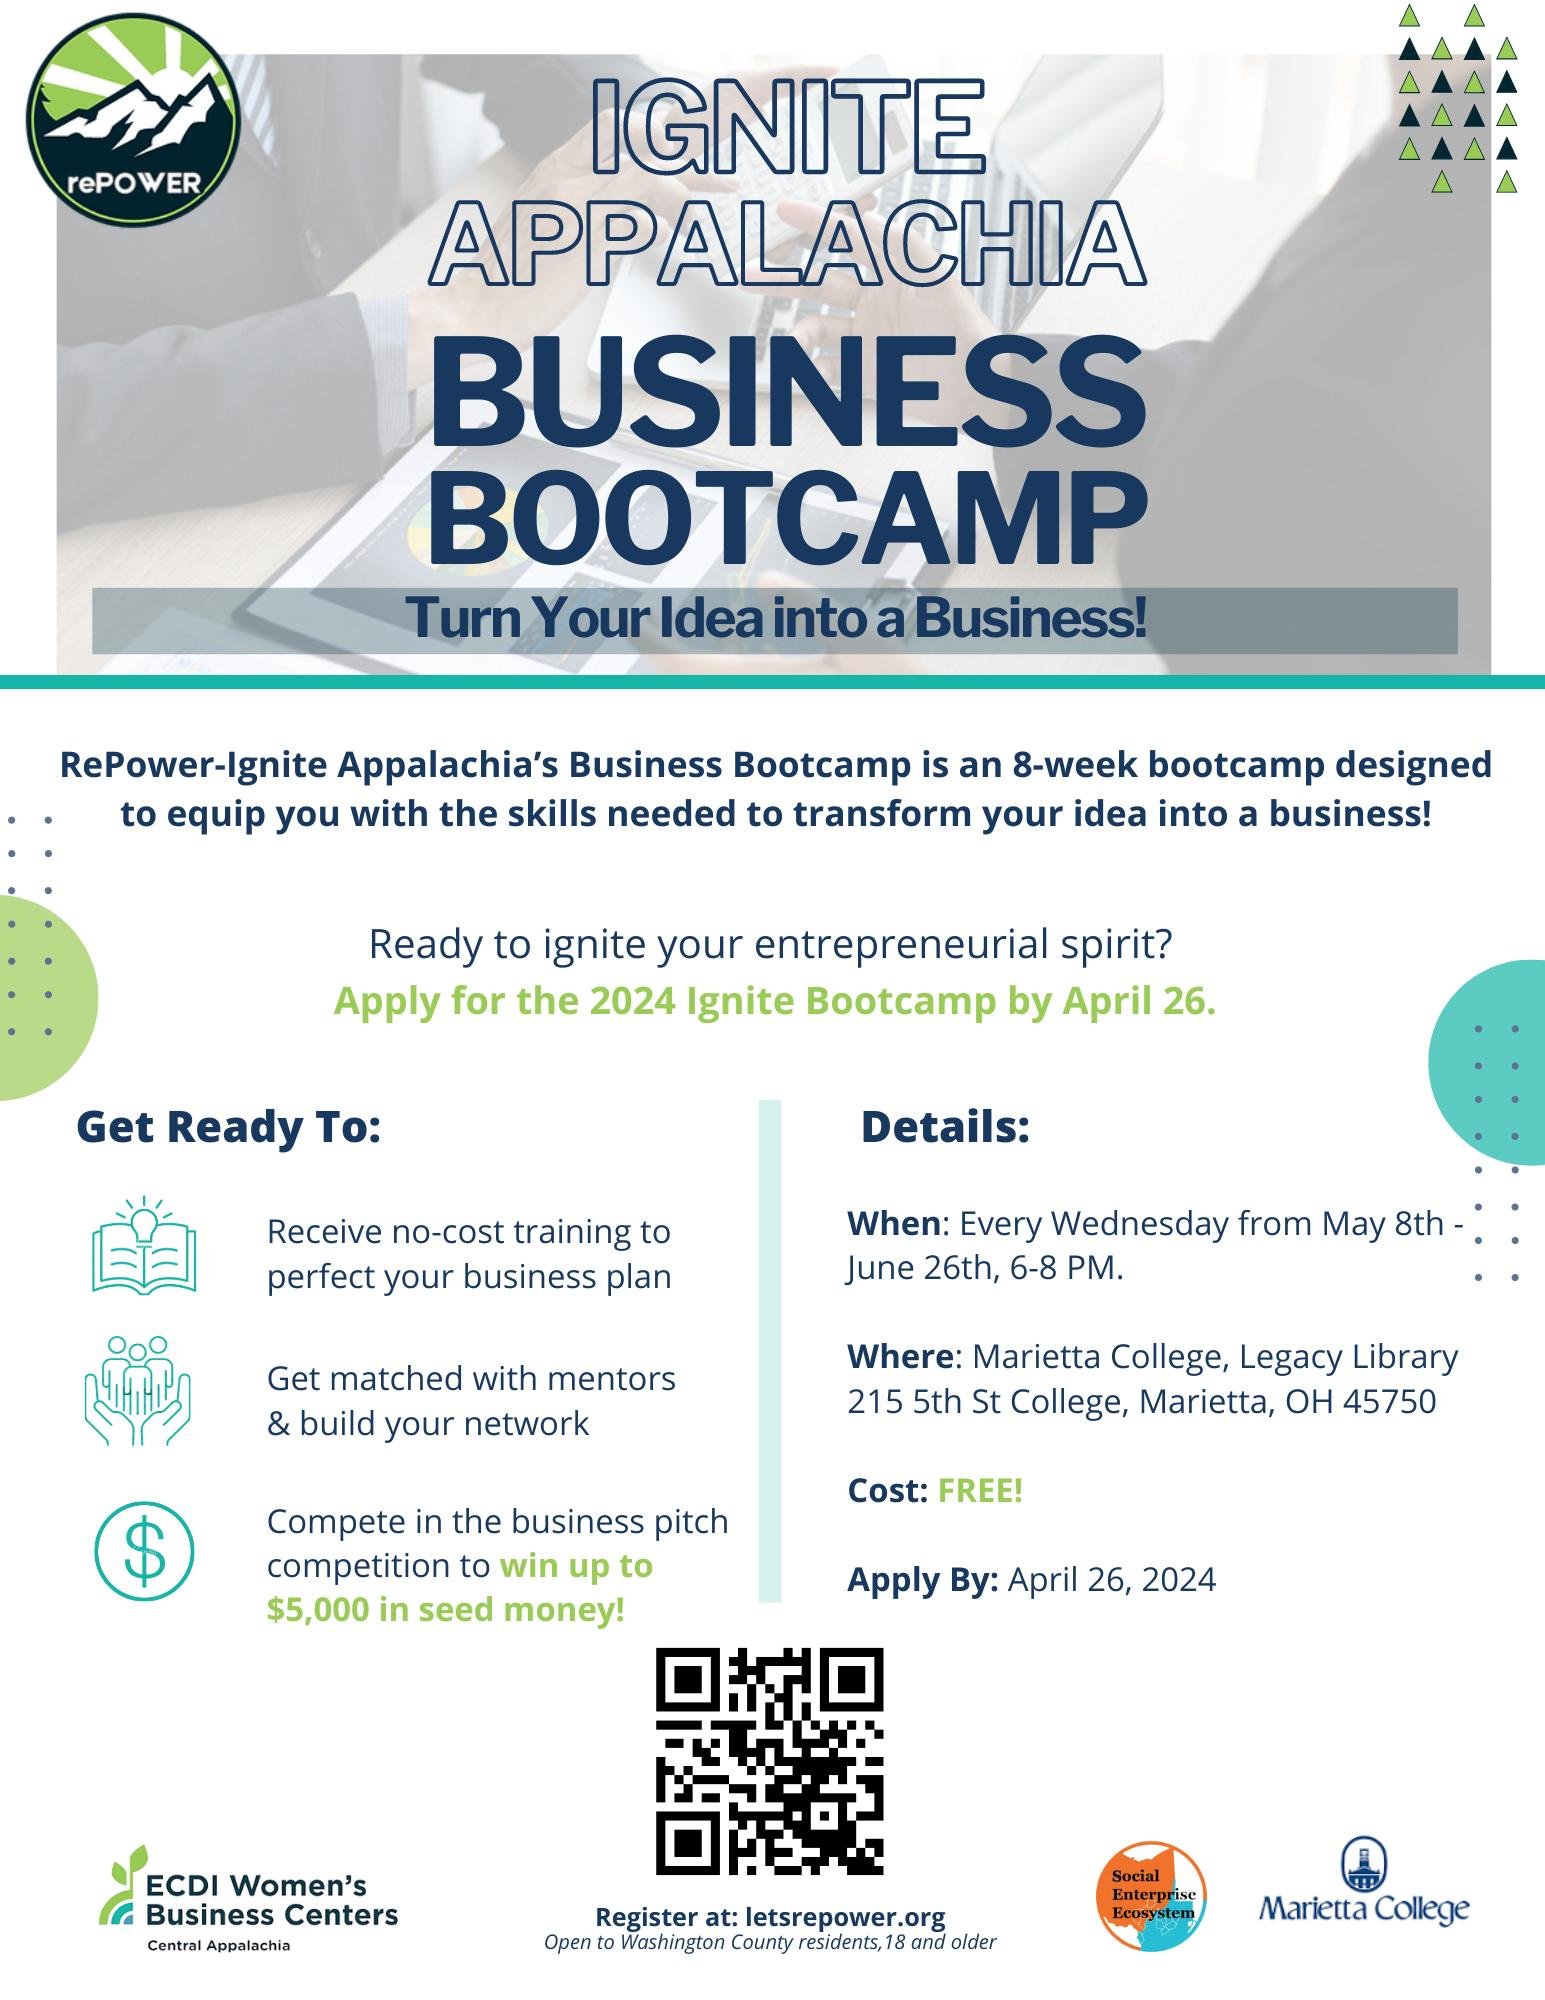 The 2024 Ignite Bootcamp is a chance for you to learn the skills you need to turn your idea into a viable business. This eight-week bootcamp will teach valuable skills, match participants with mentors, and culminate in a business pitch competition wi